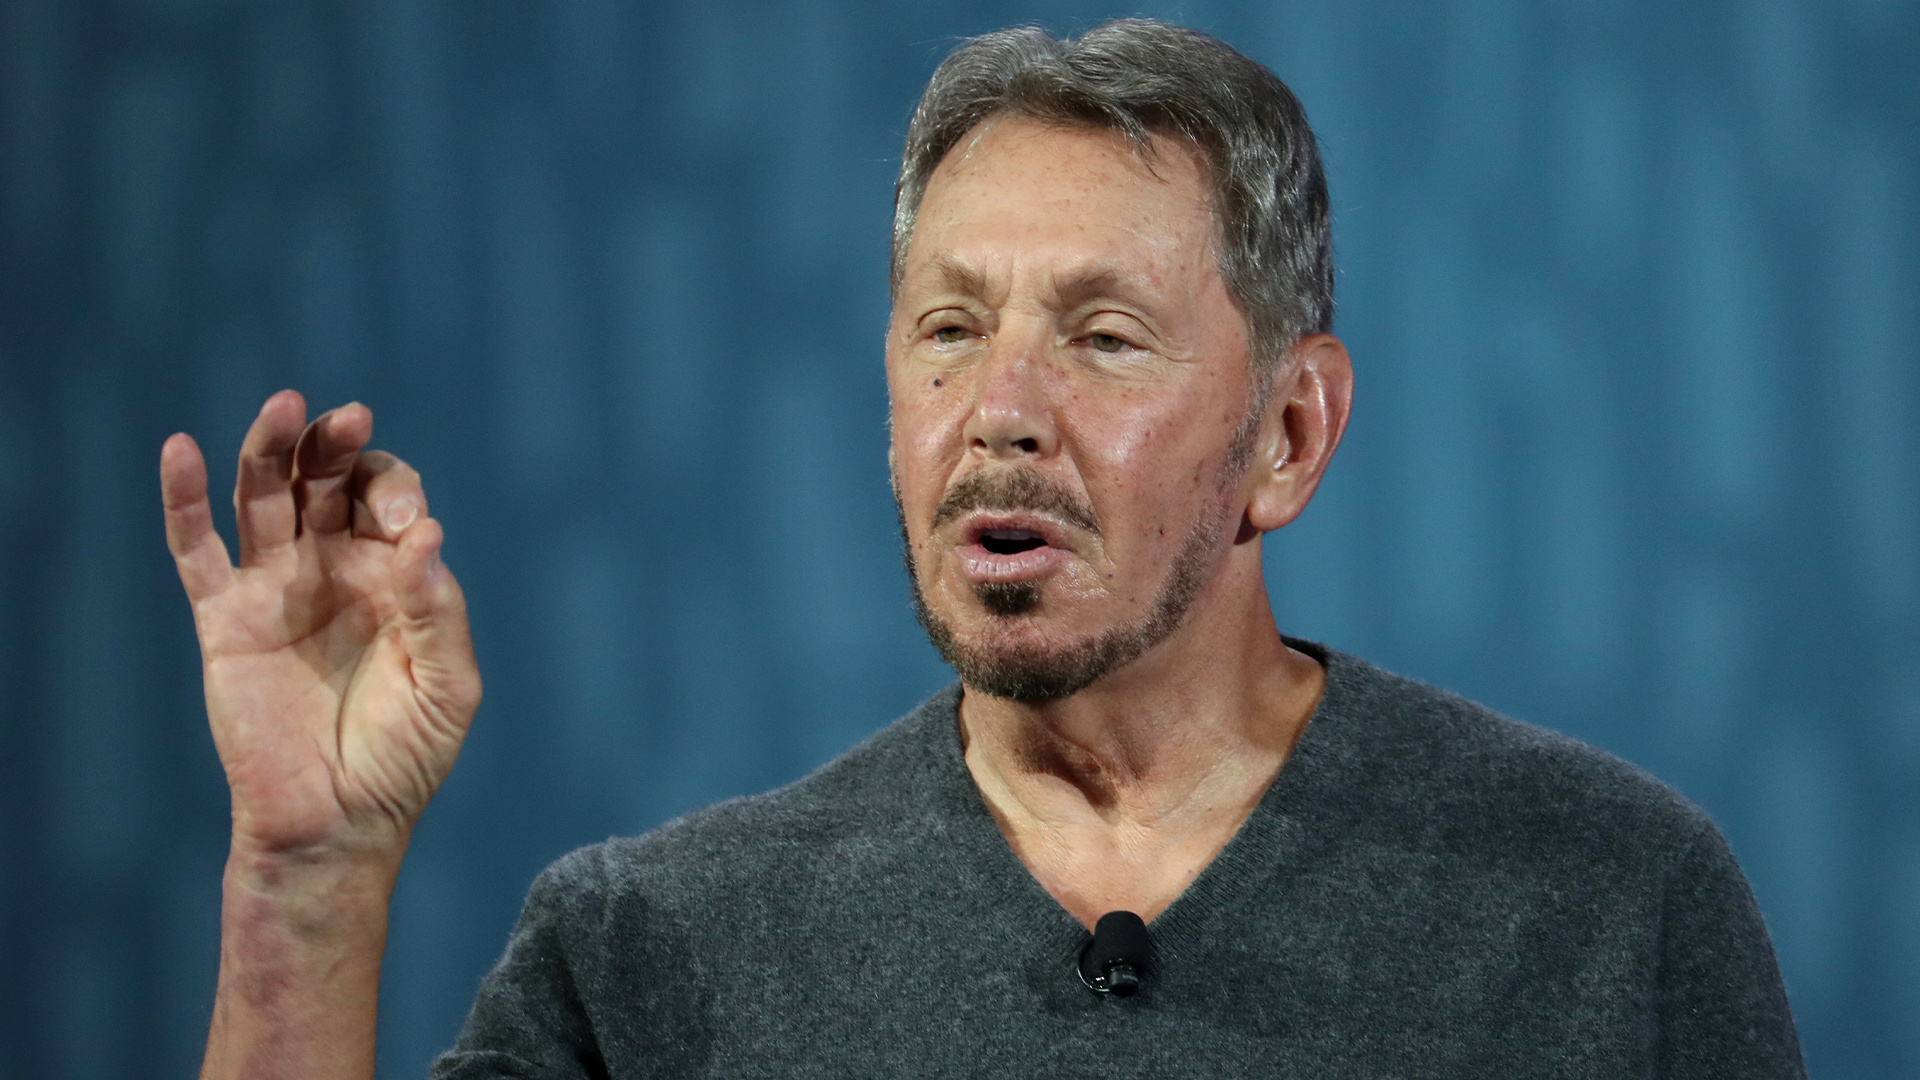 Oracle is betting big that each country will soon have its own sovereign cloud